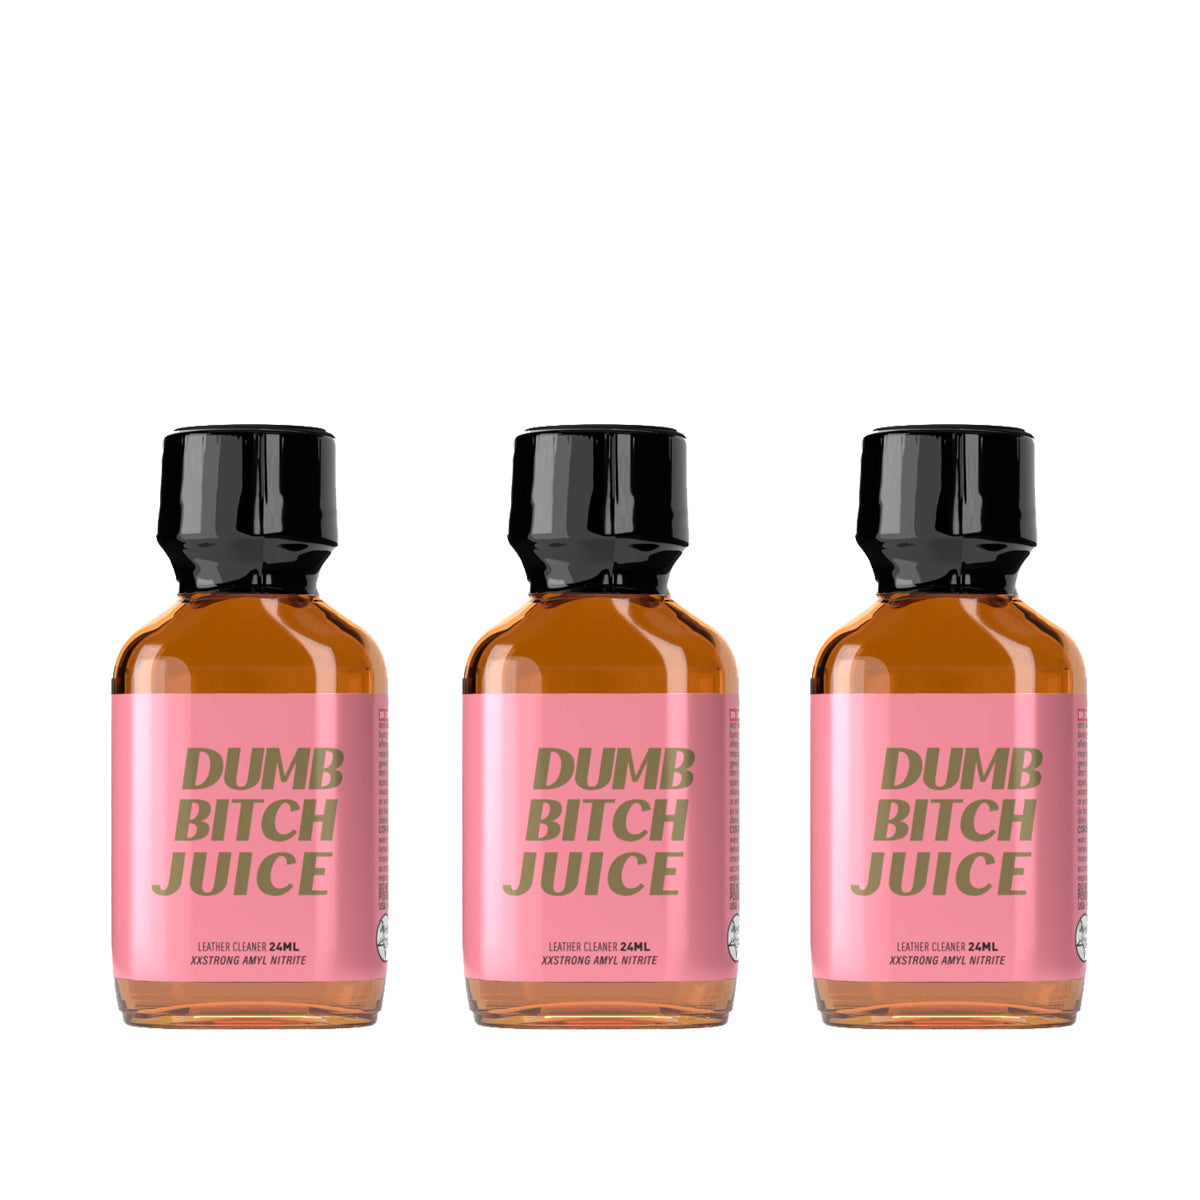 A triple pack of Dumb Bitch Juice Amyl Nitrite Poppers.